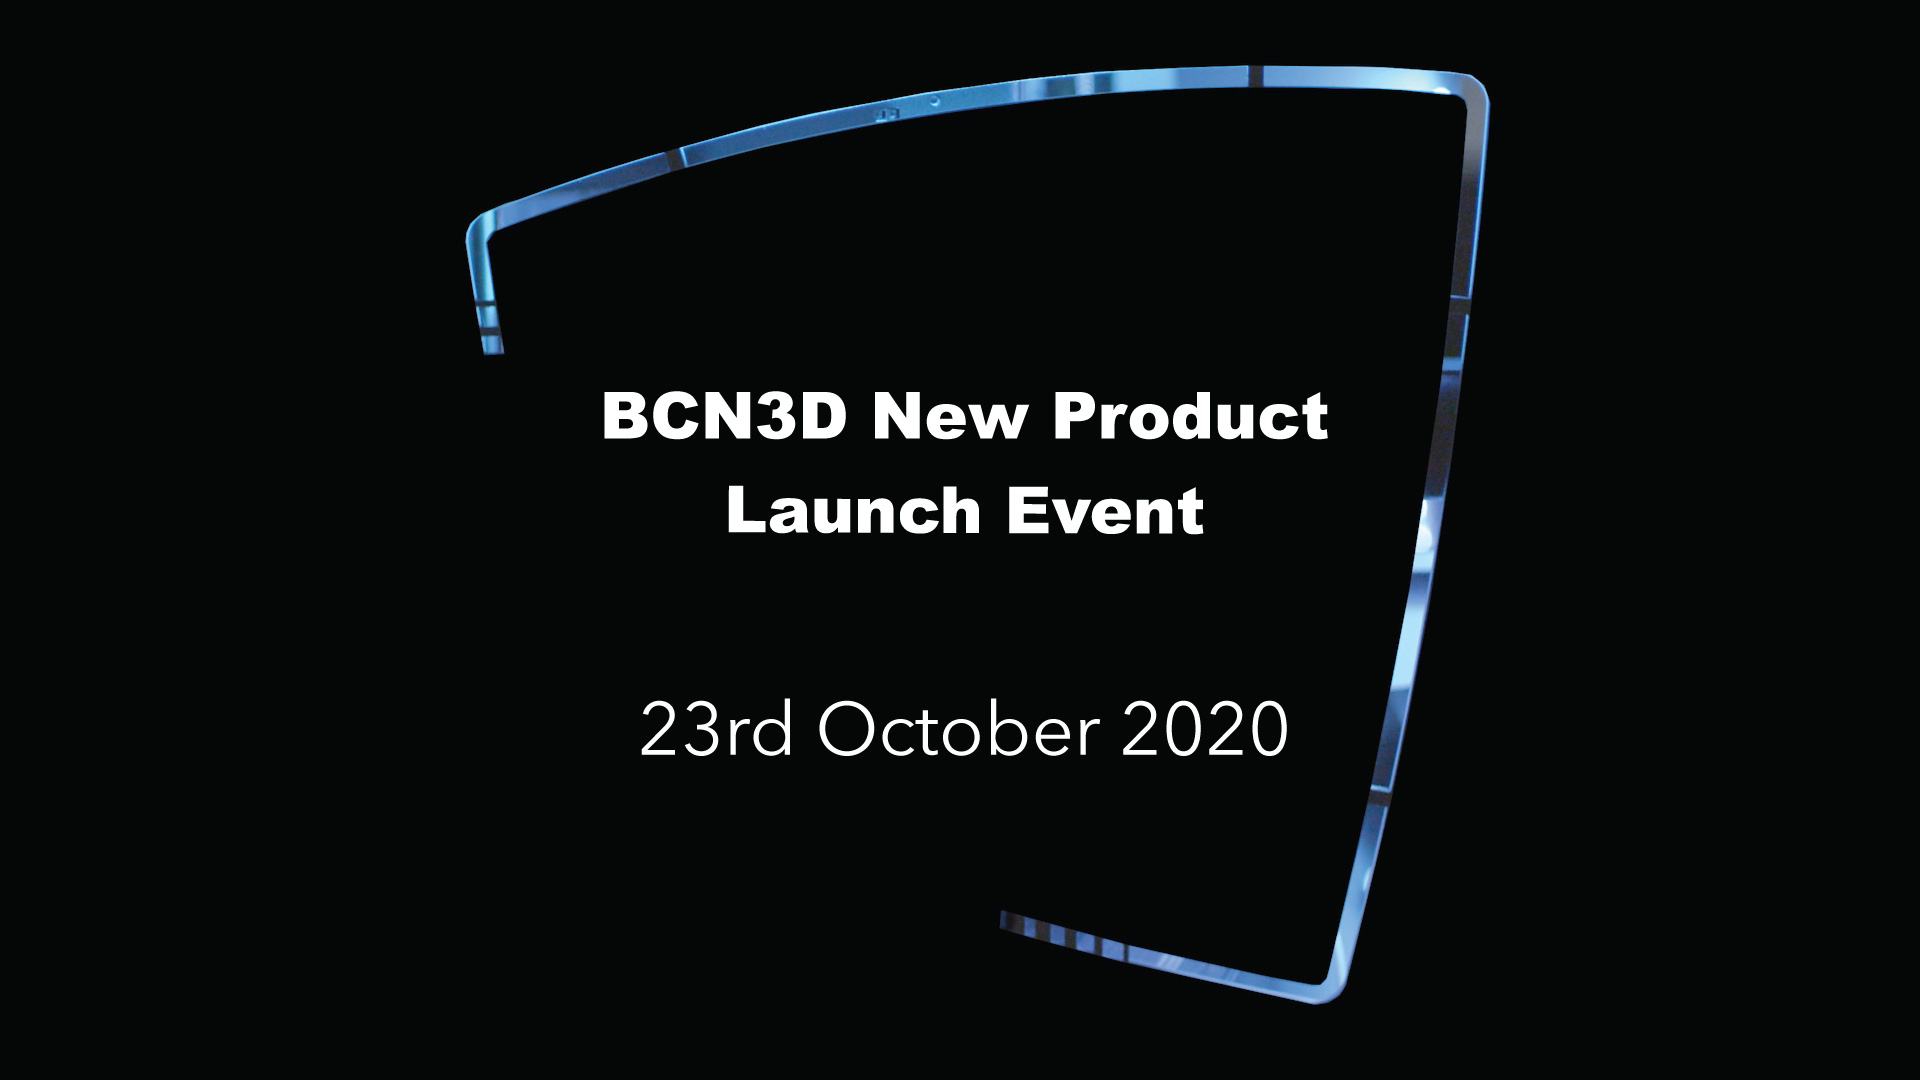 BCN3D New Product Local Launch Event